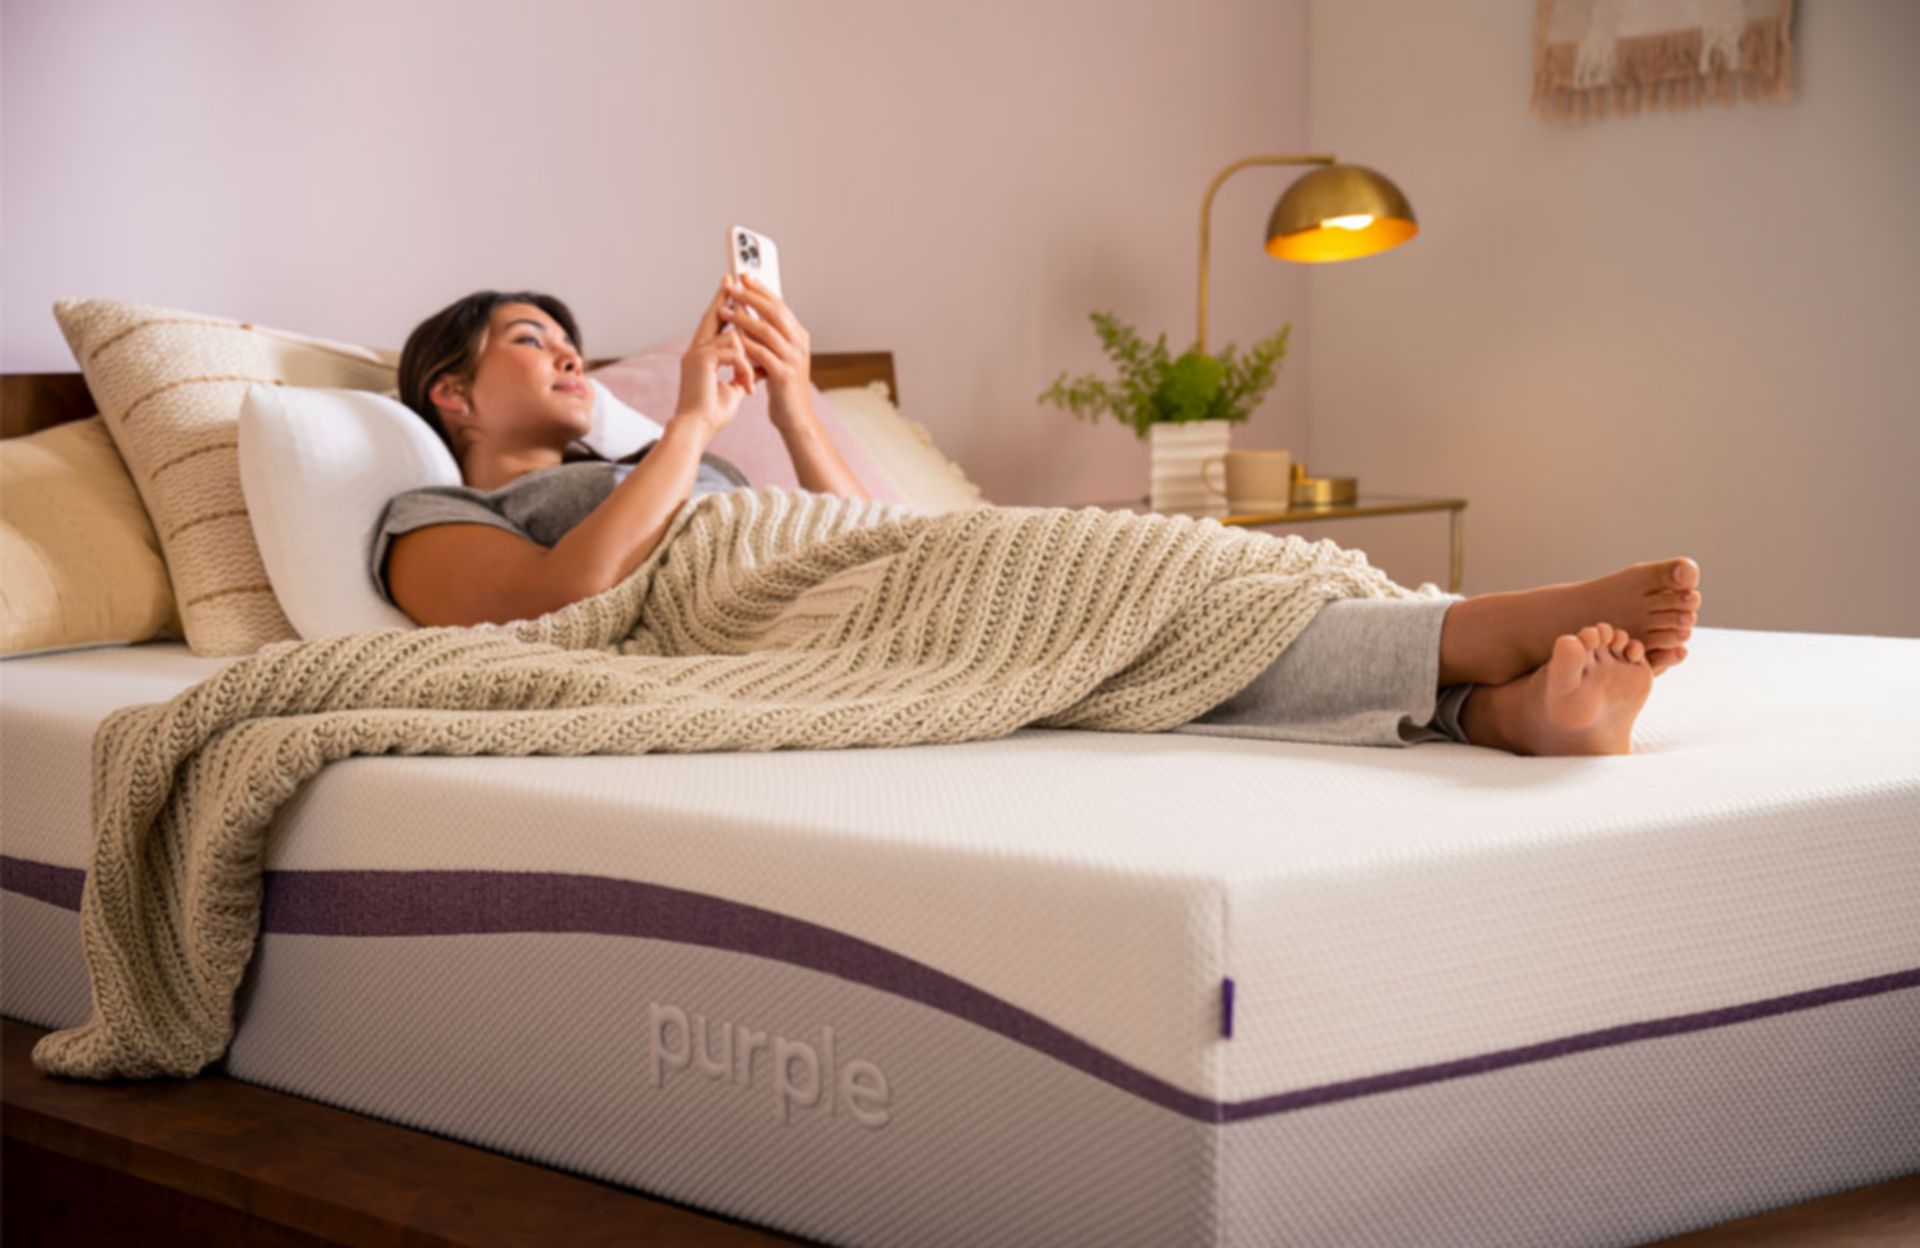 Woman Laying on Purple Mattress with Blanket looking at phone